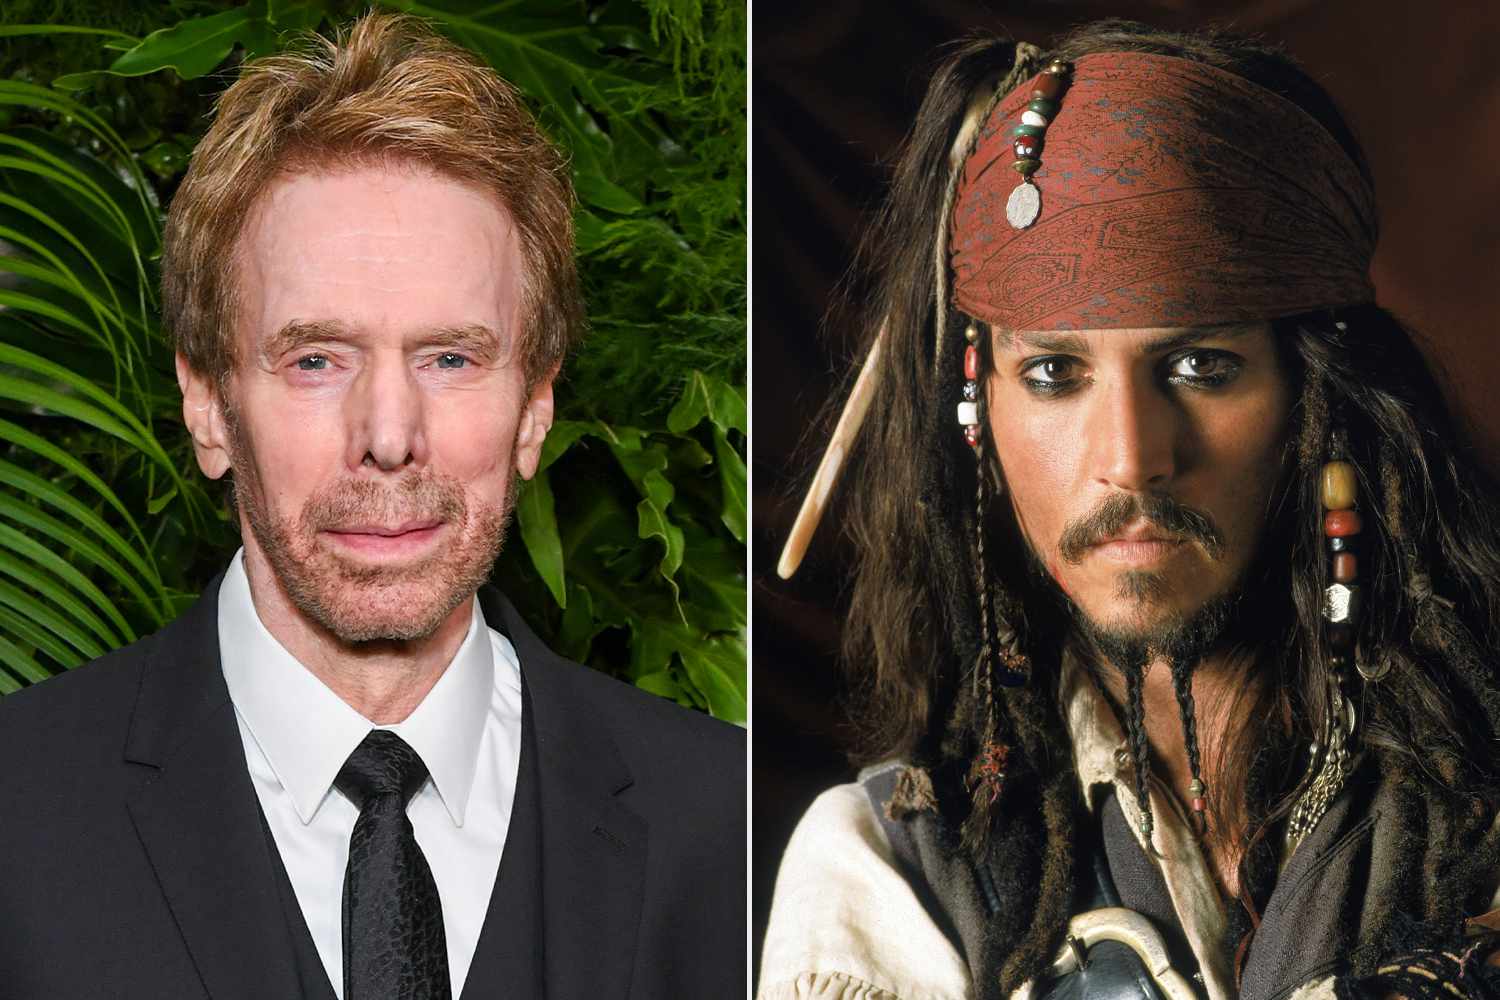 Johnny Depp Would Be in Next “Pirates” Movie 'If It Was Up to Me,' Says Producer Jerry Bruckheimer